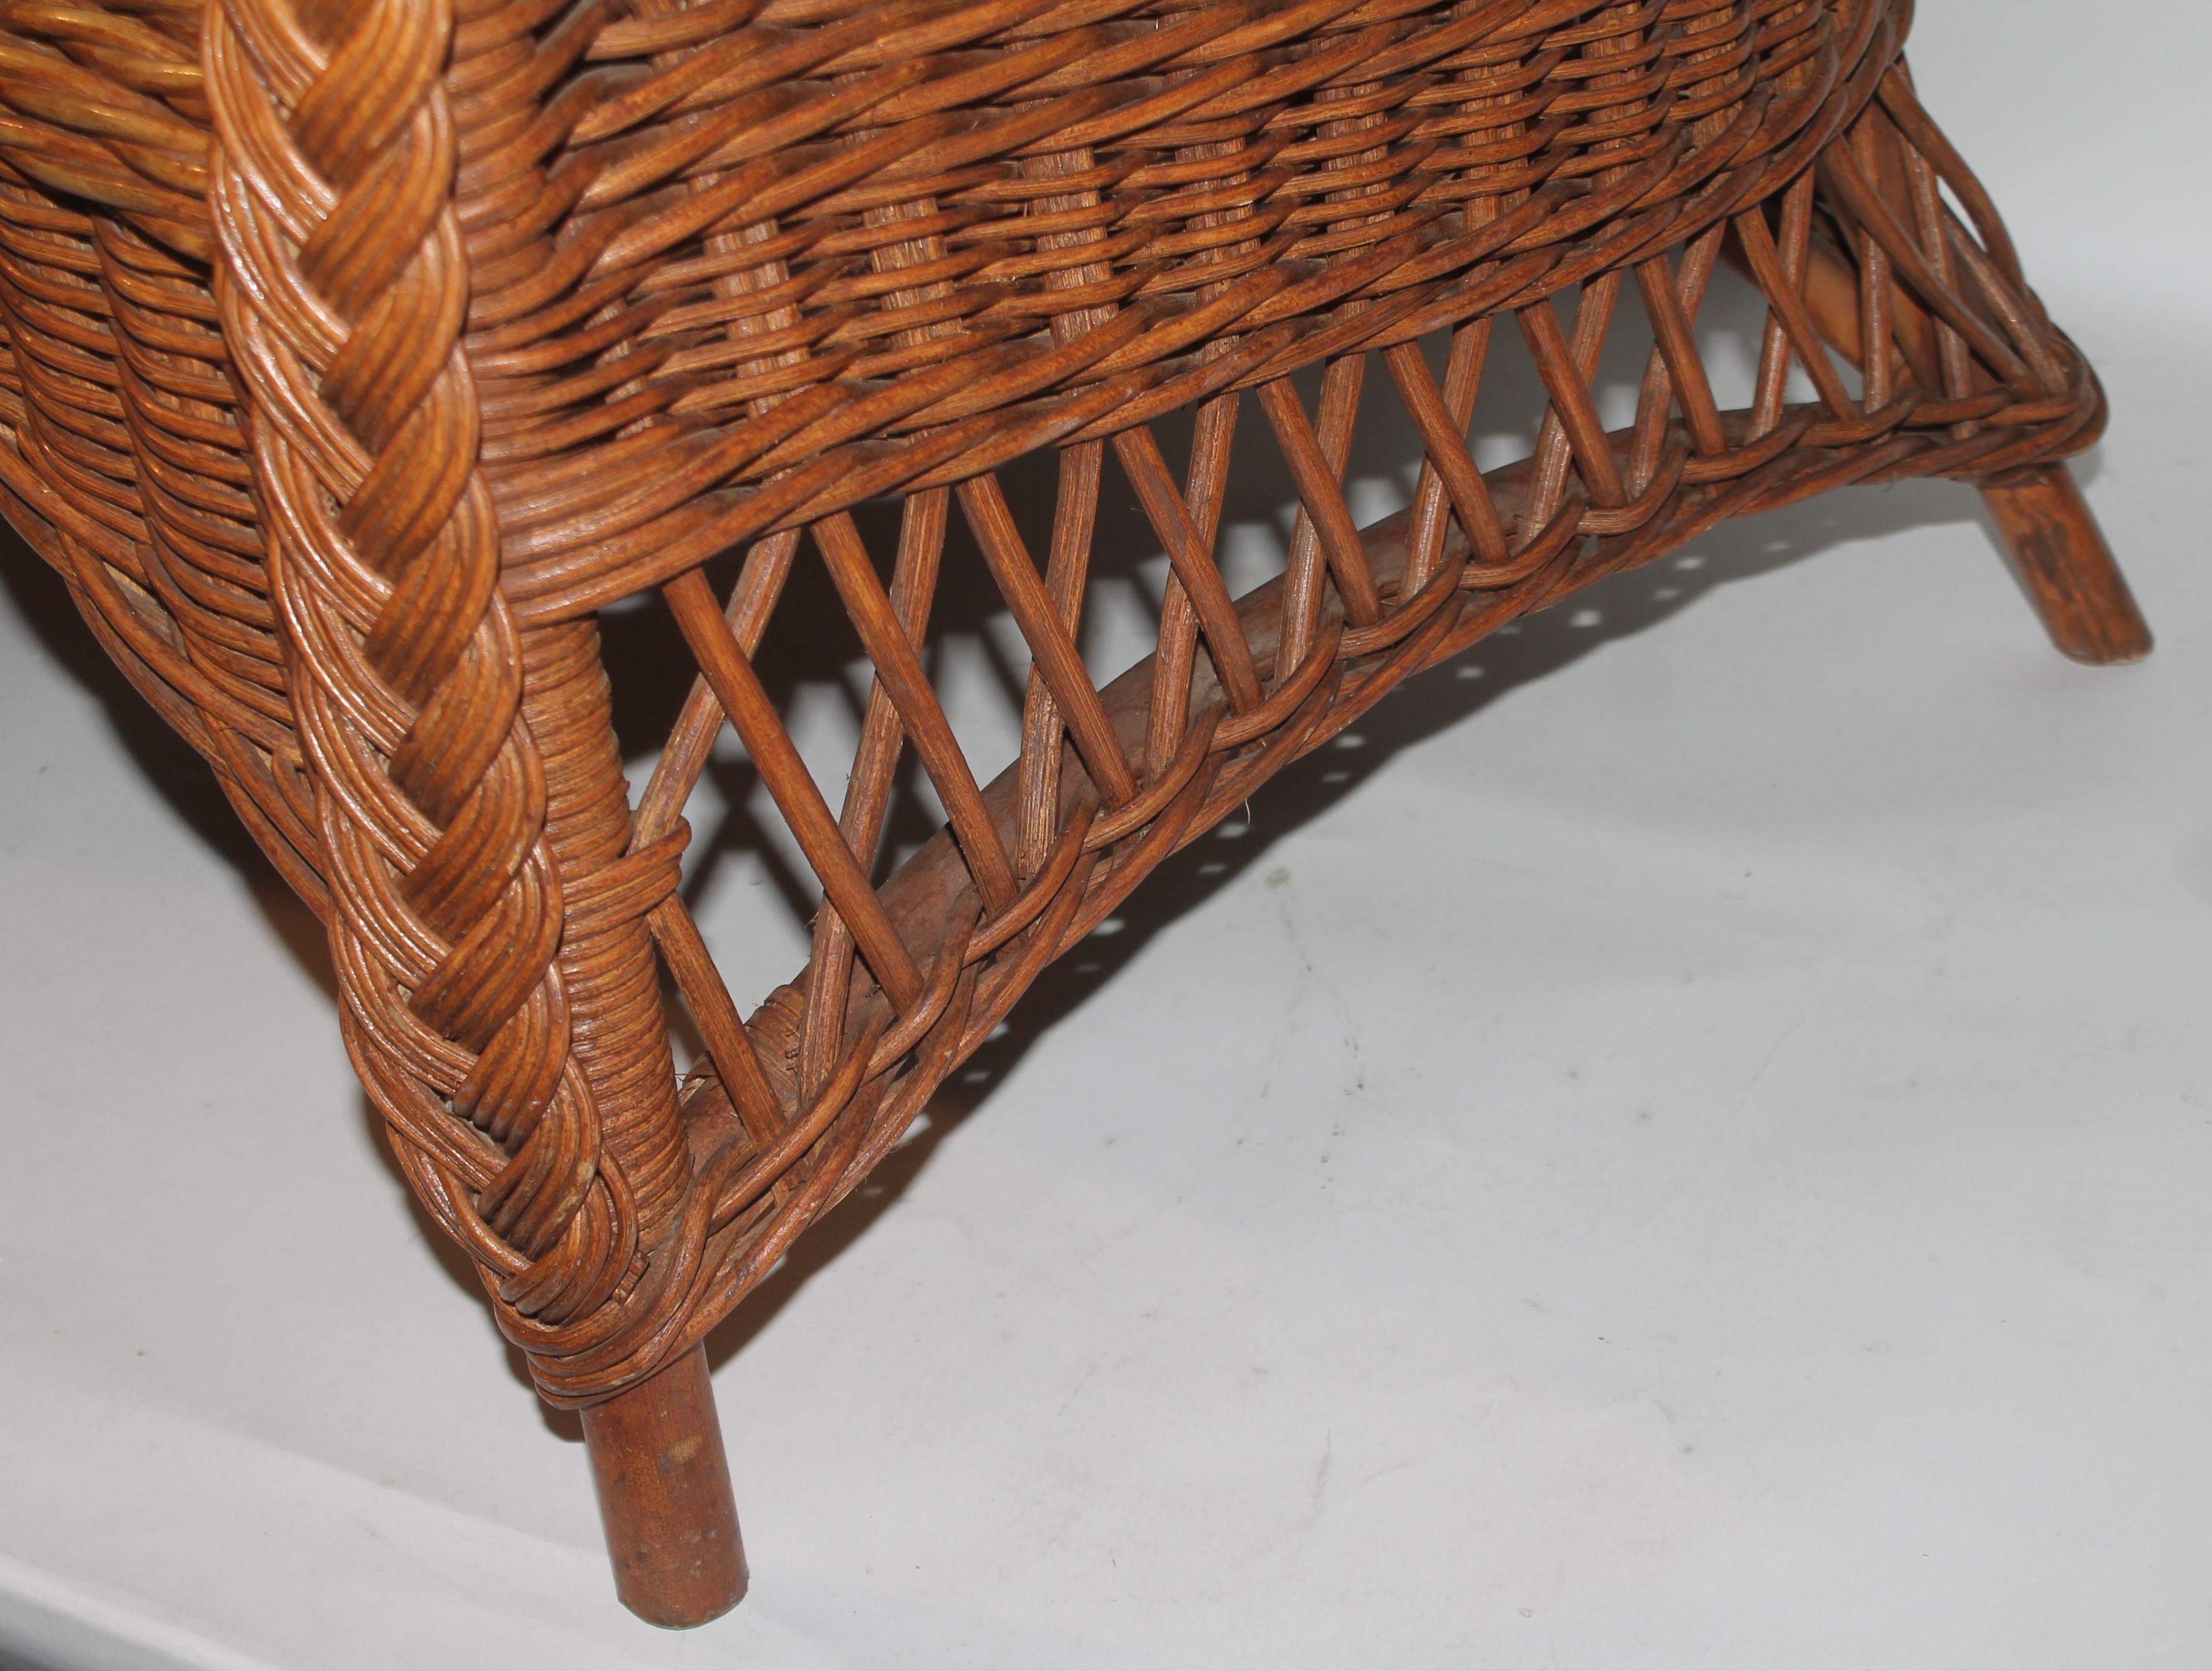 Hand-Woven Haywood Wakefield Wicker Armchair with Cushions